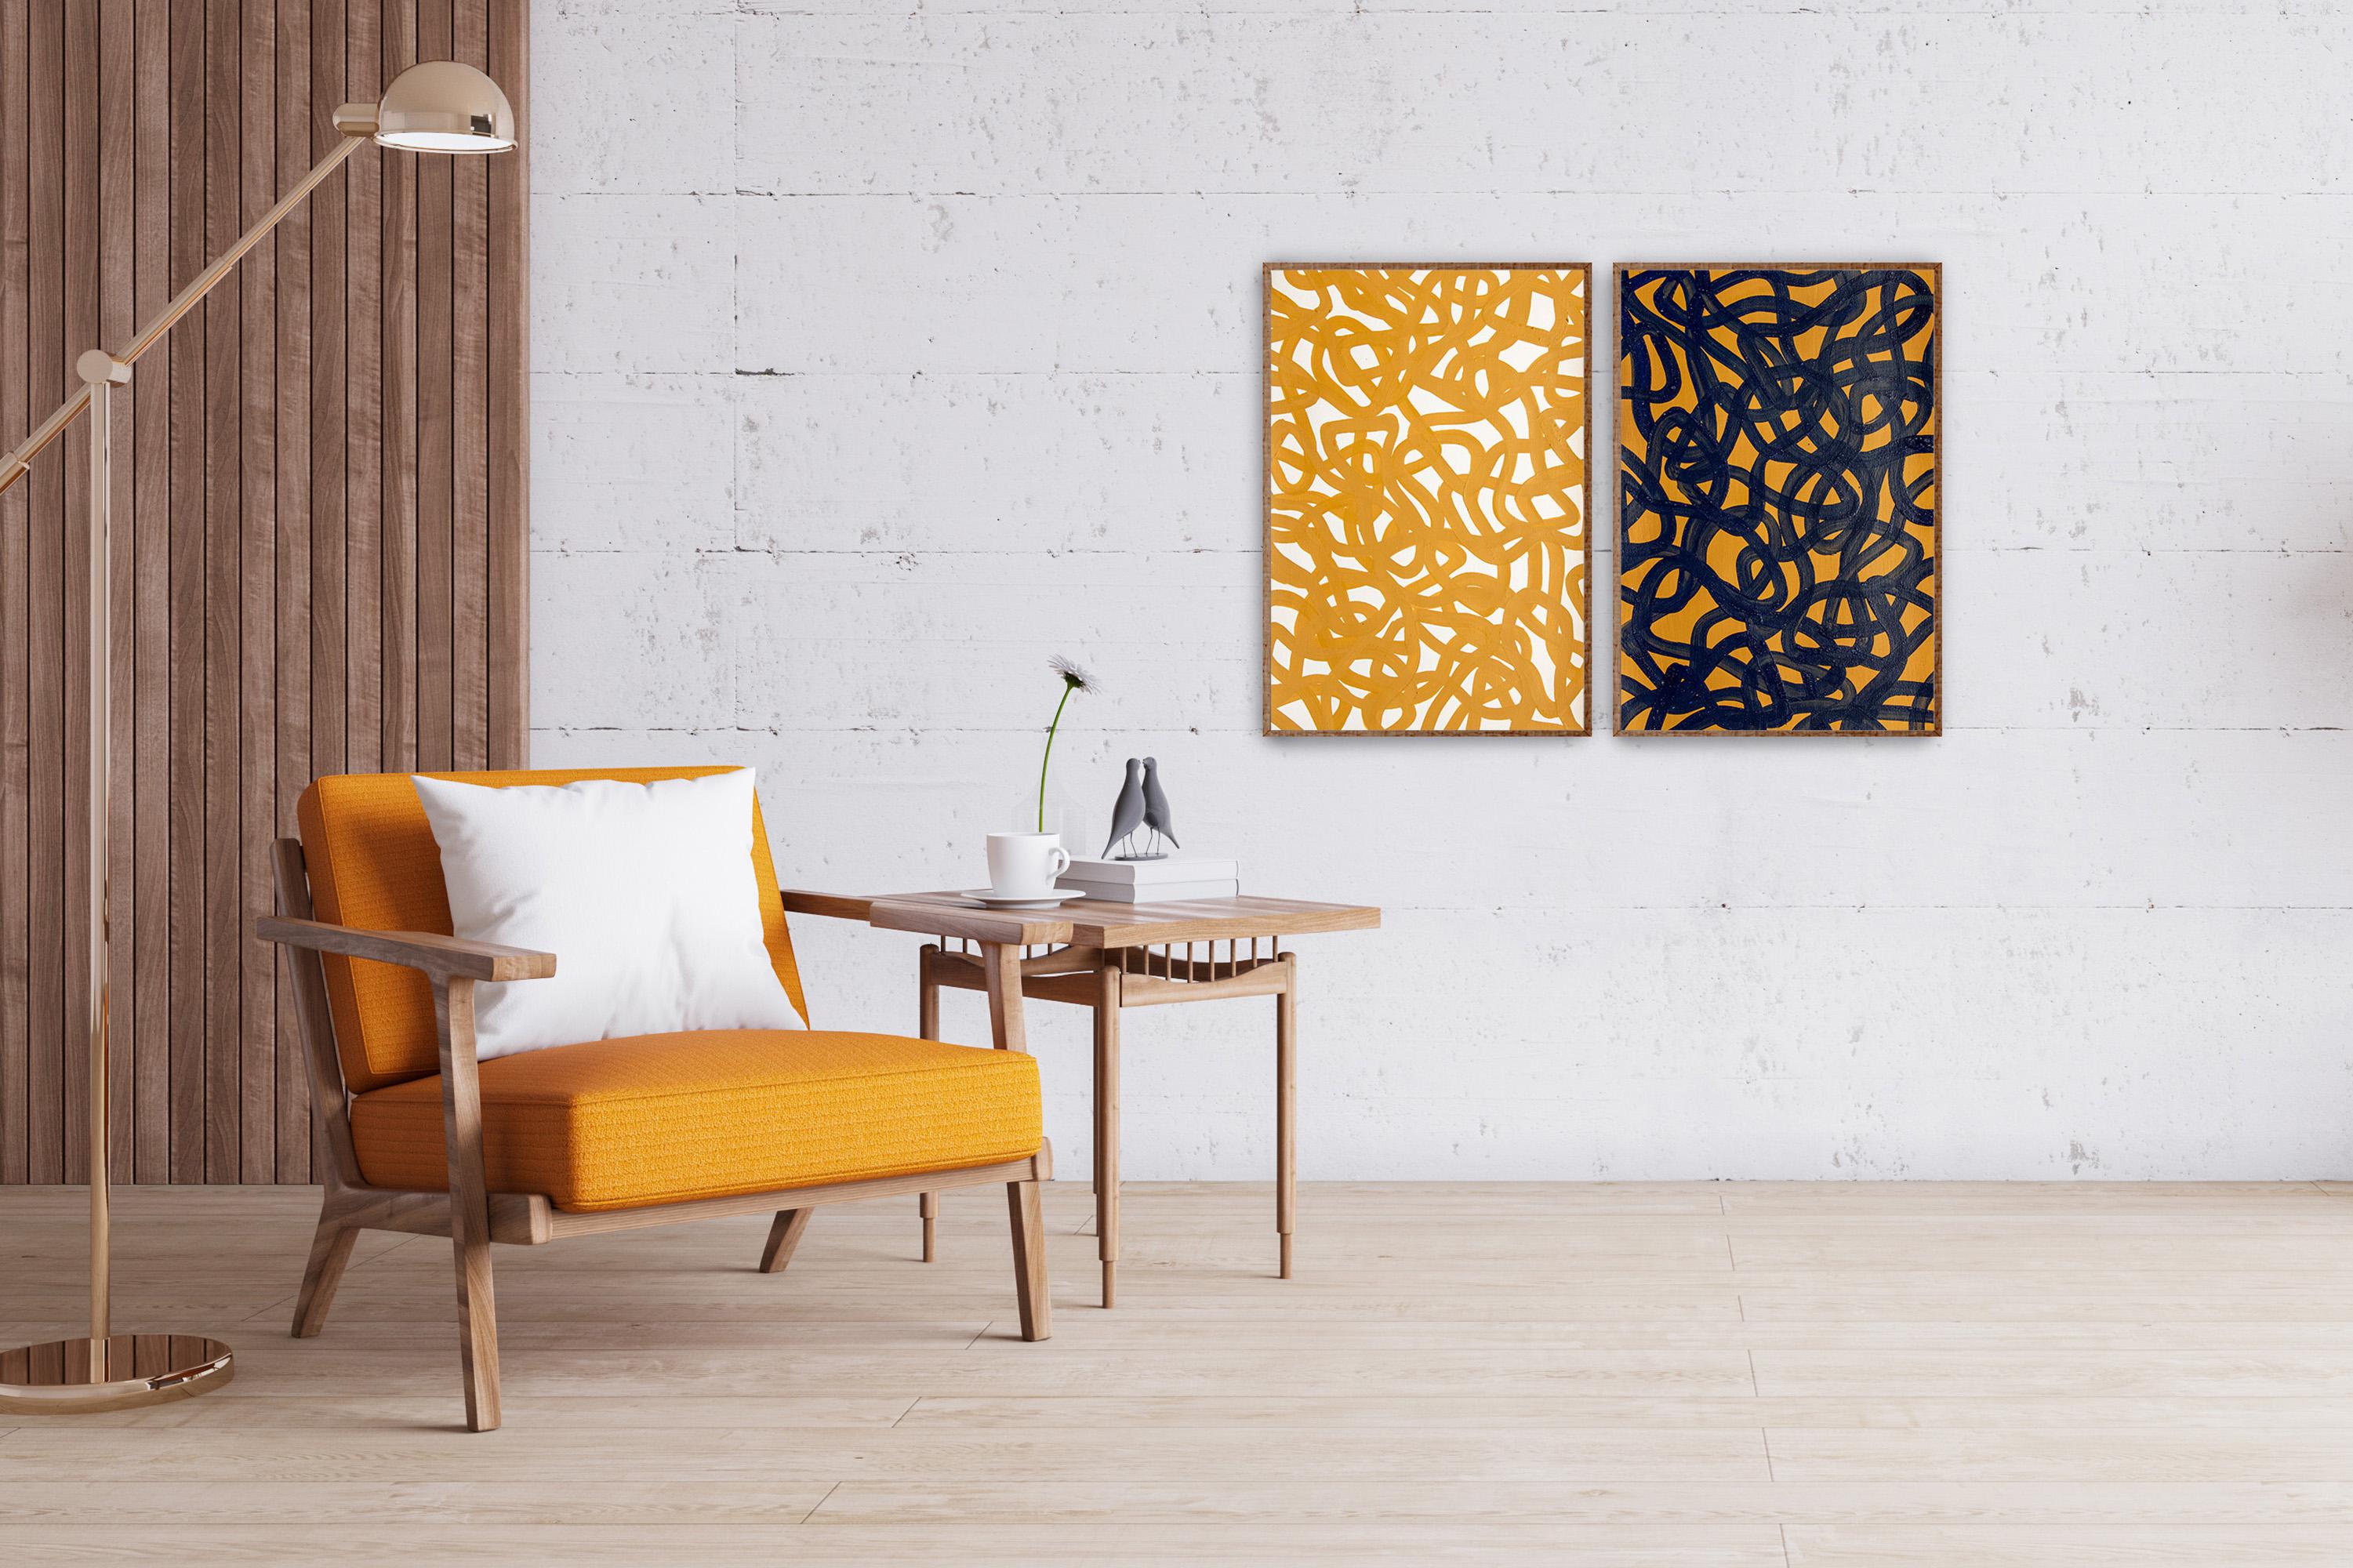 Ochre and Black Diptych, Overlapping White Abstract Fish Gestures, Mediterranean - Painting by Enric Servera